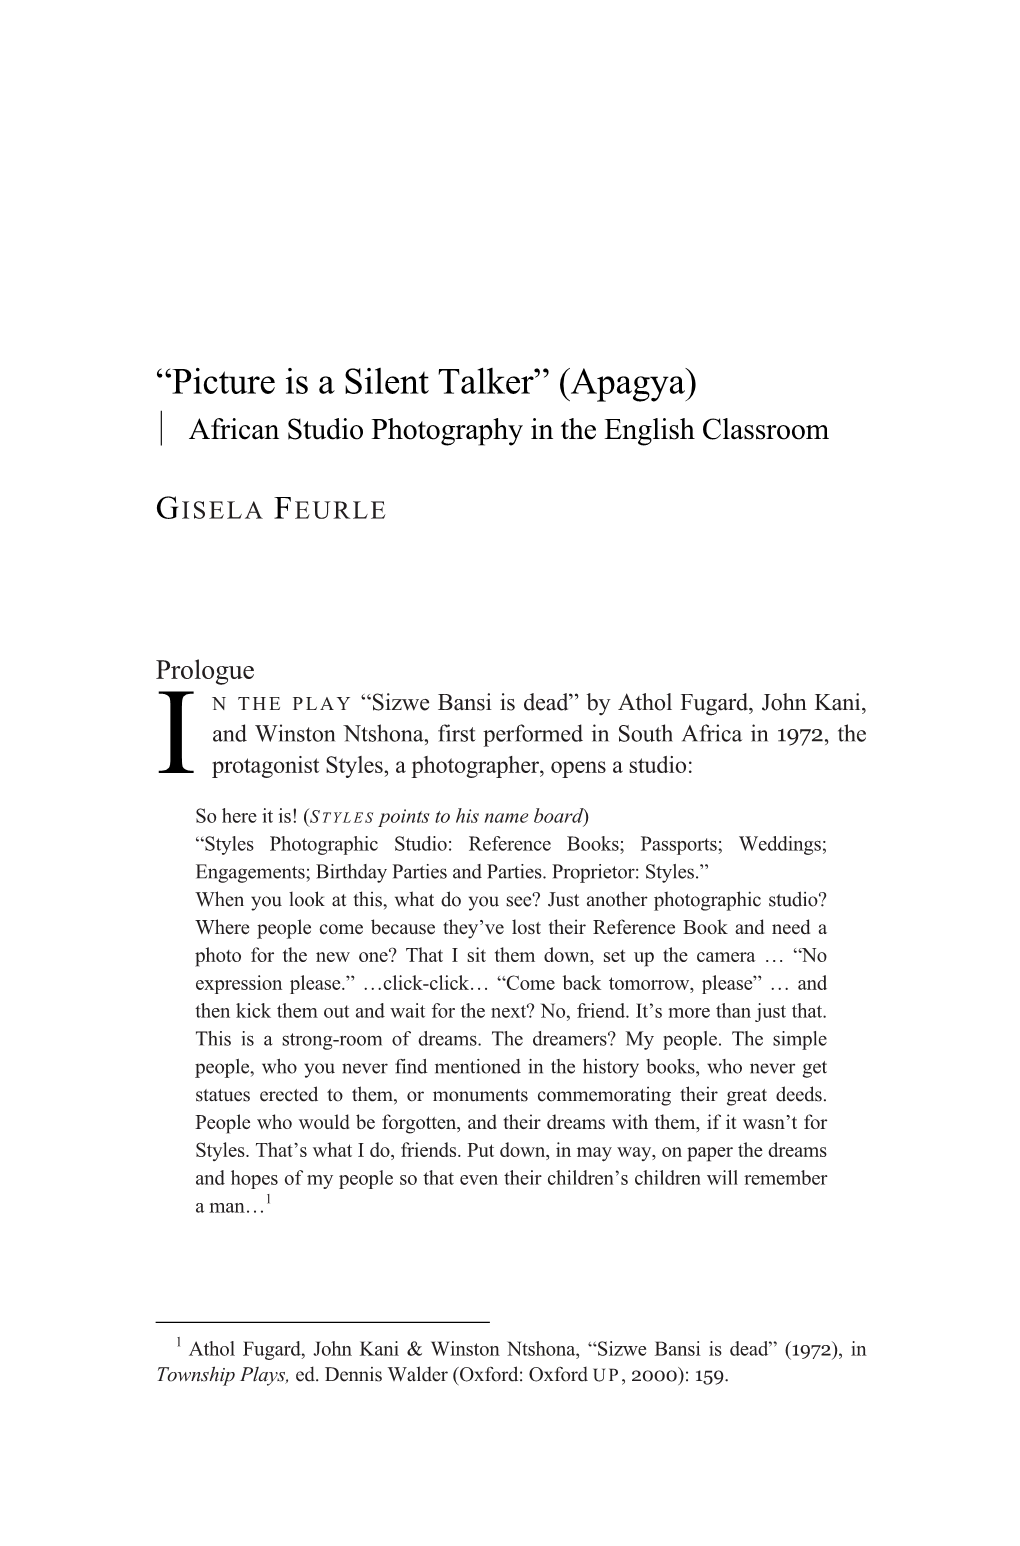 “Picture Is a Silent Talker” (Apagya) African Studio Photography in the English Classroom